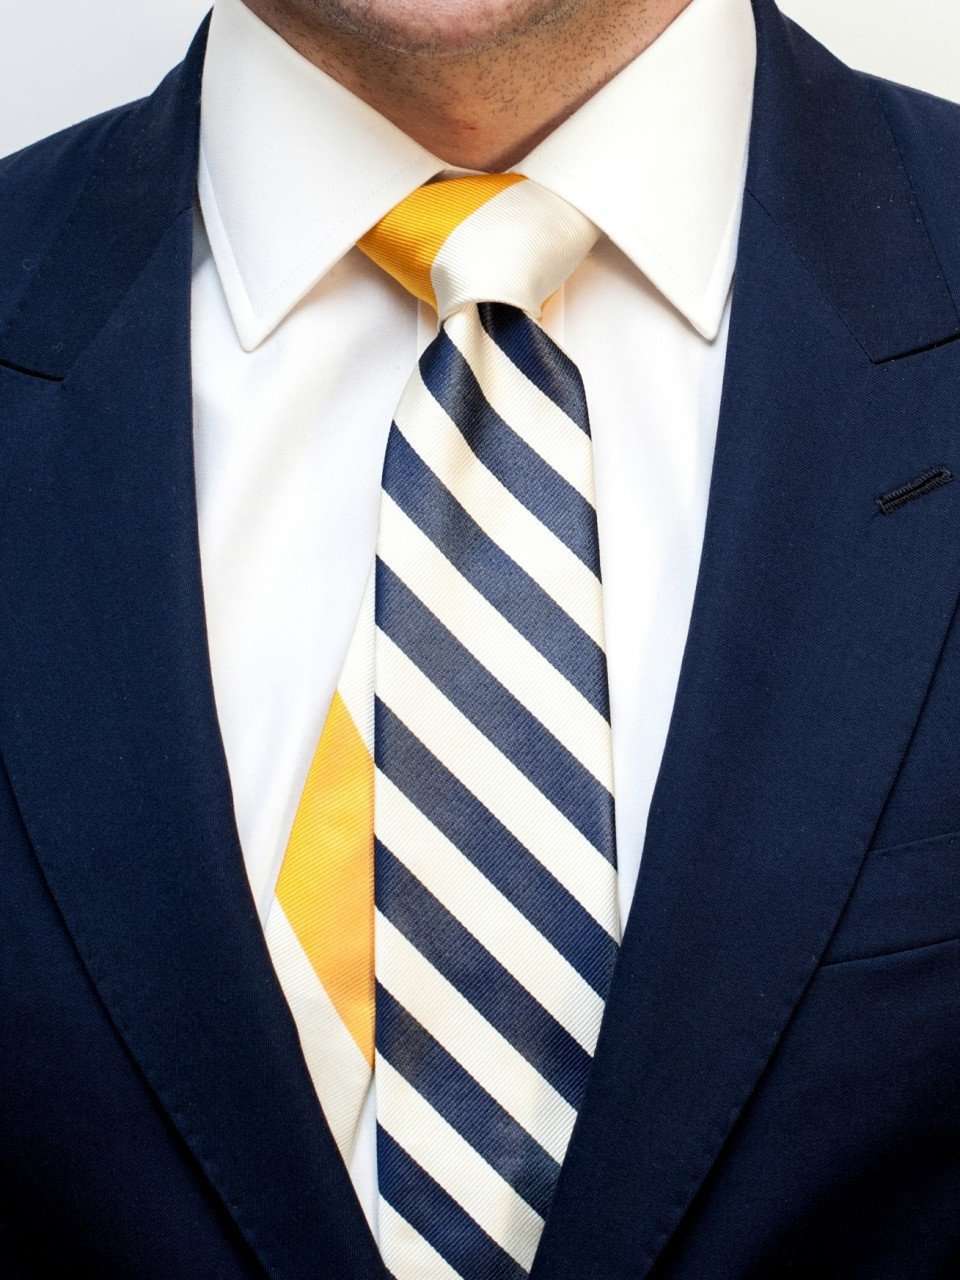 Seersucker Sidekick Necktie in Navy and White with Gold and White Knot by Social Primer - Country Club Prep